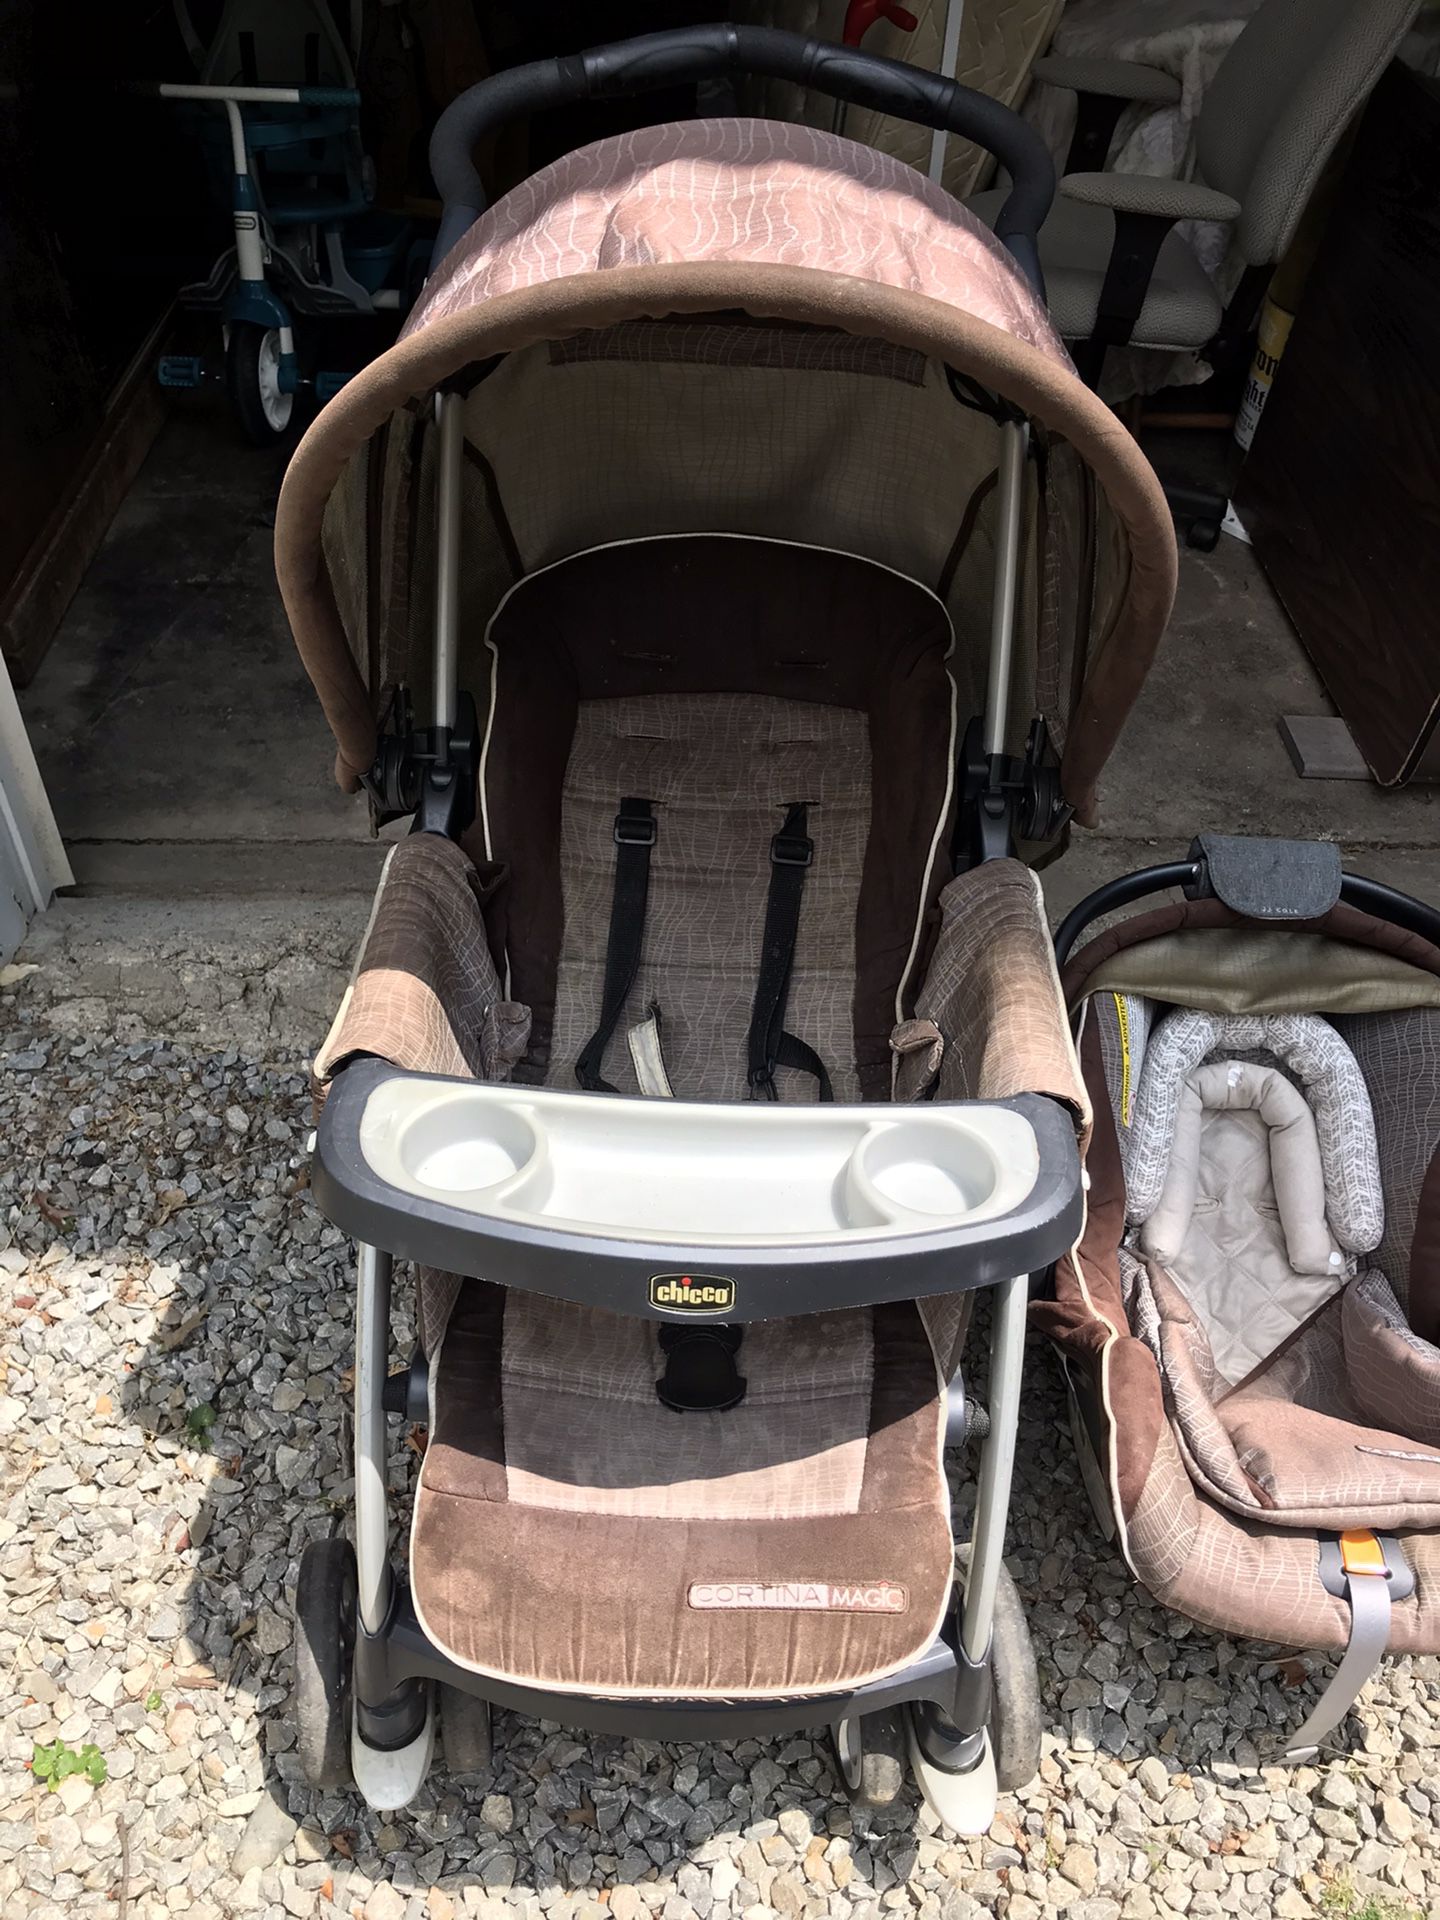 Chicco stroller, infant car seat carrier and 2 bases. Includes JJ Cole hand grip cushion and head support for infant.